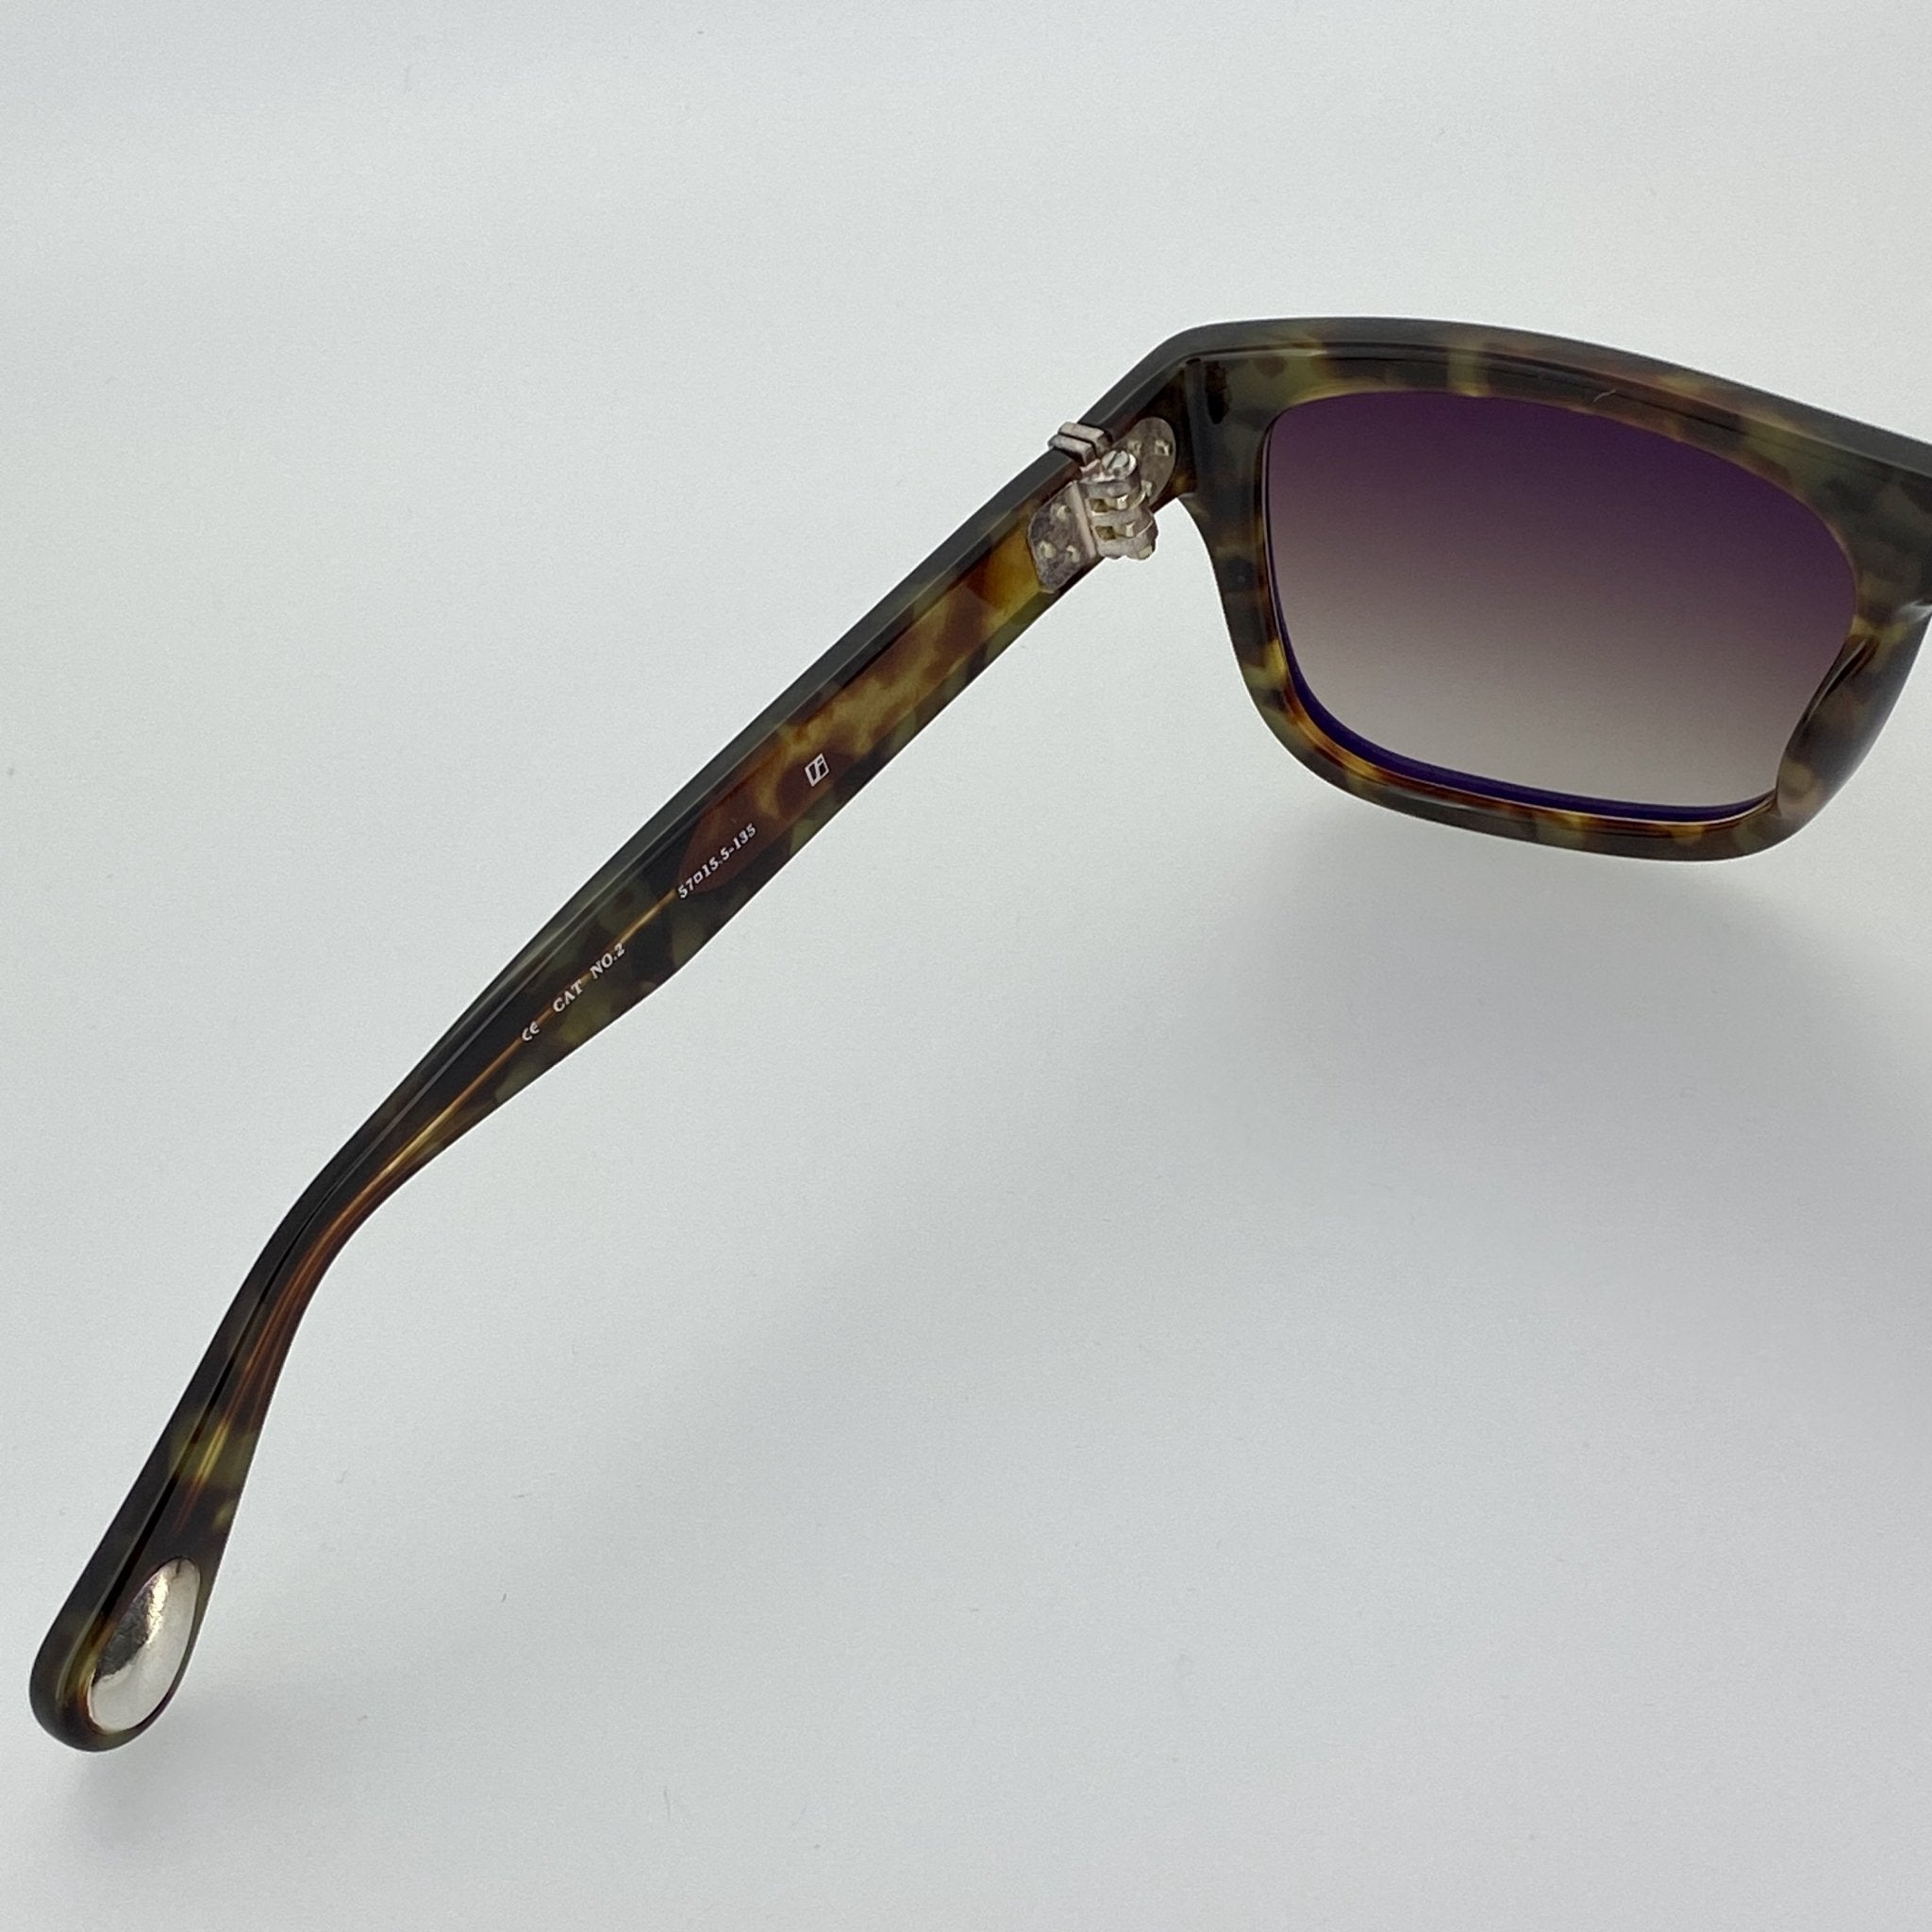 Ann Demeulemeester Sunglasses Flat Top Black Tortoise Shell 925 Silver with Brown Lenses AD2C6SUN - Watches & Crystals